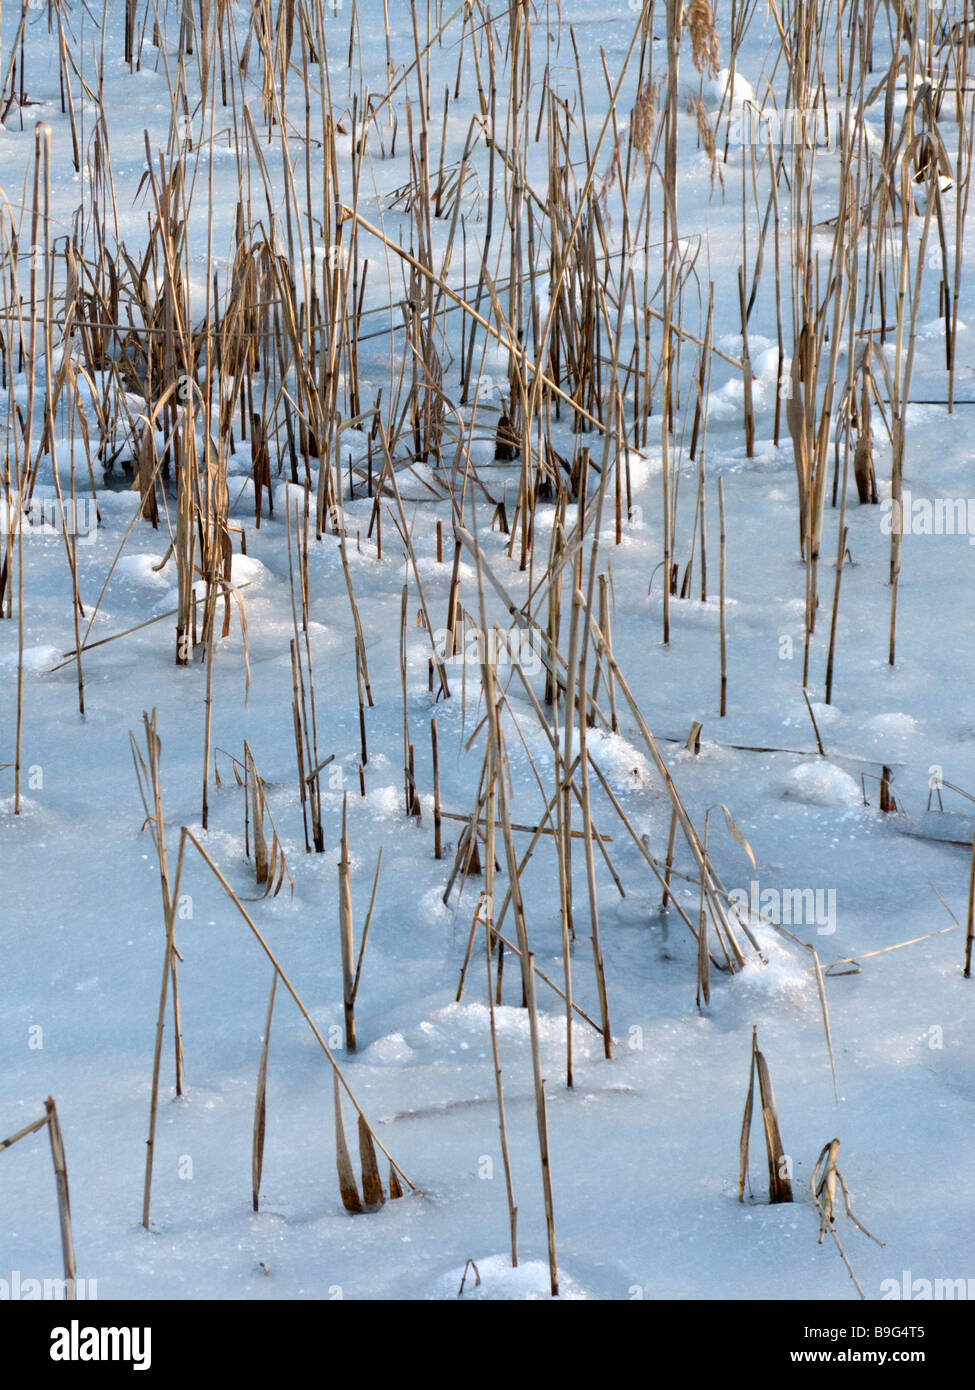 Dead reeds in a frozen snow-covered pond Stock Photo